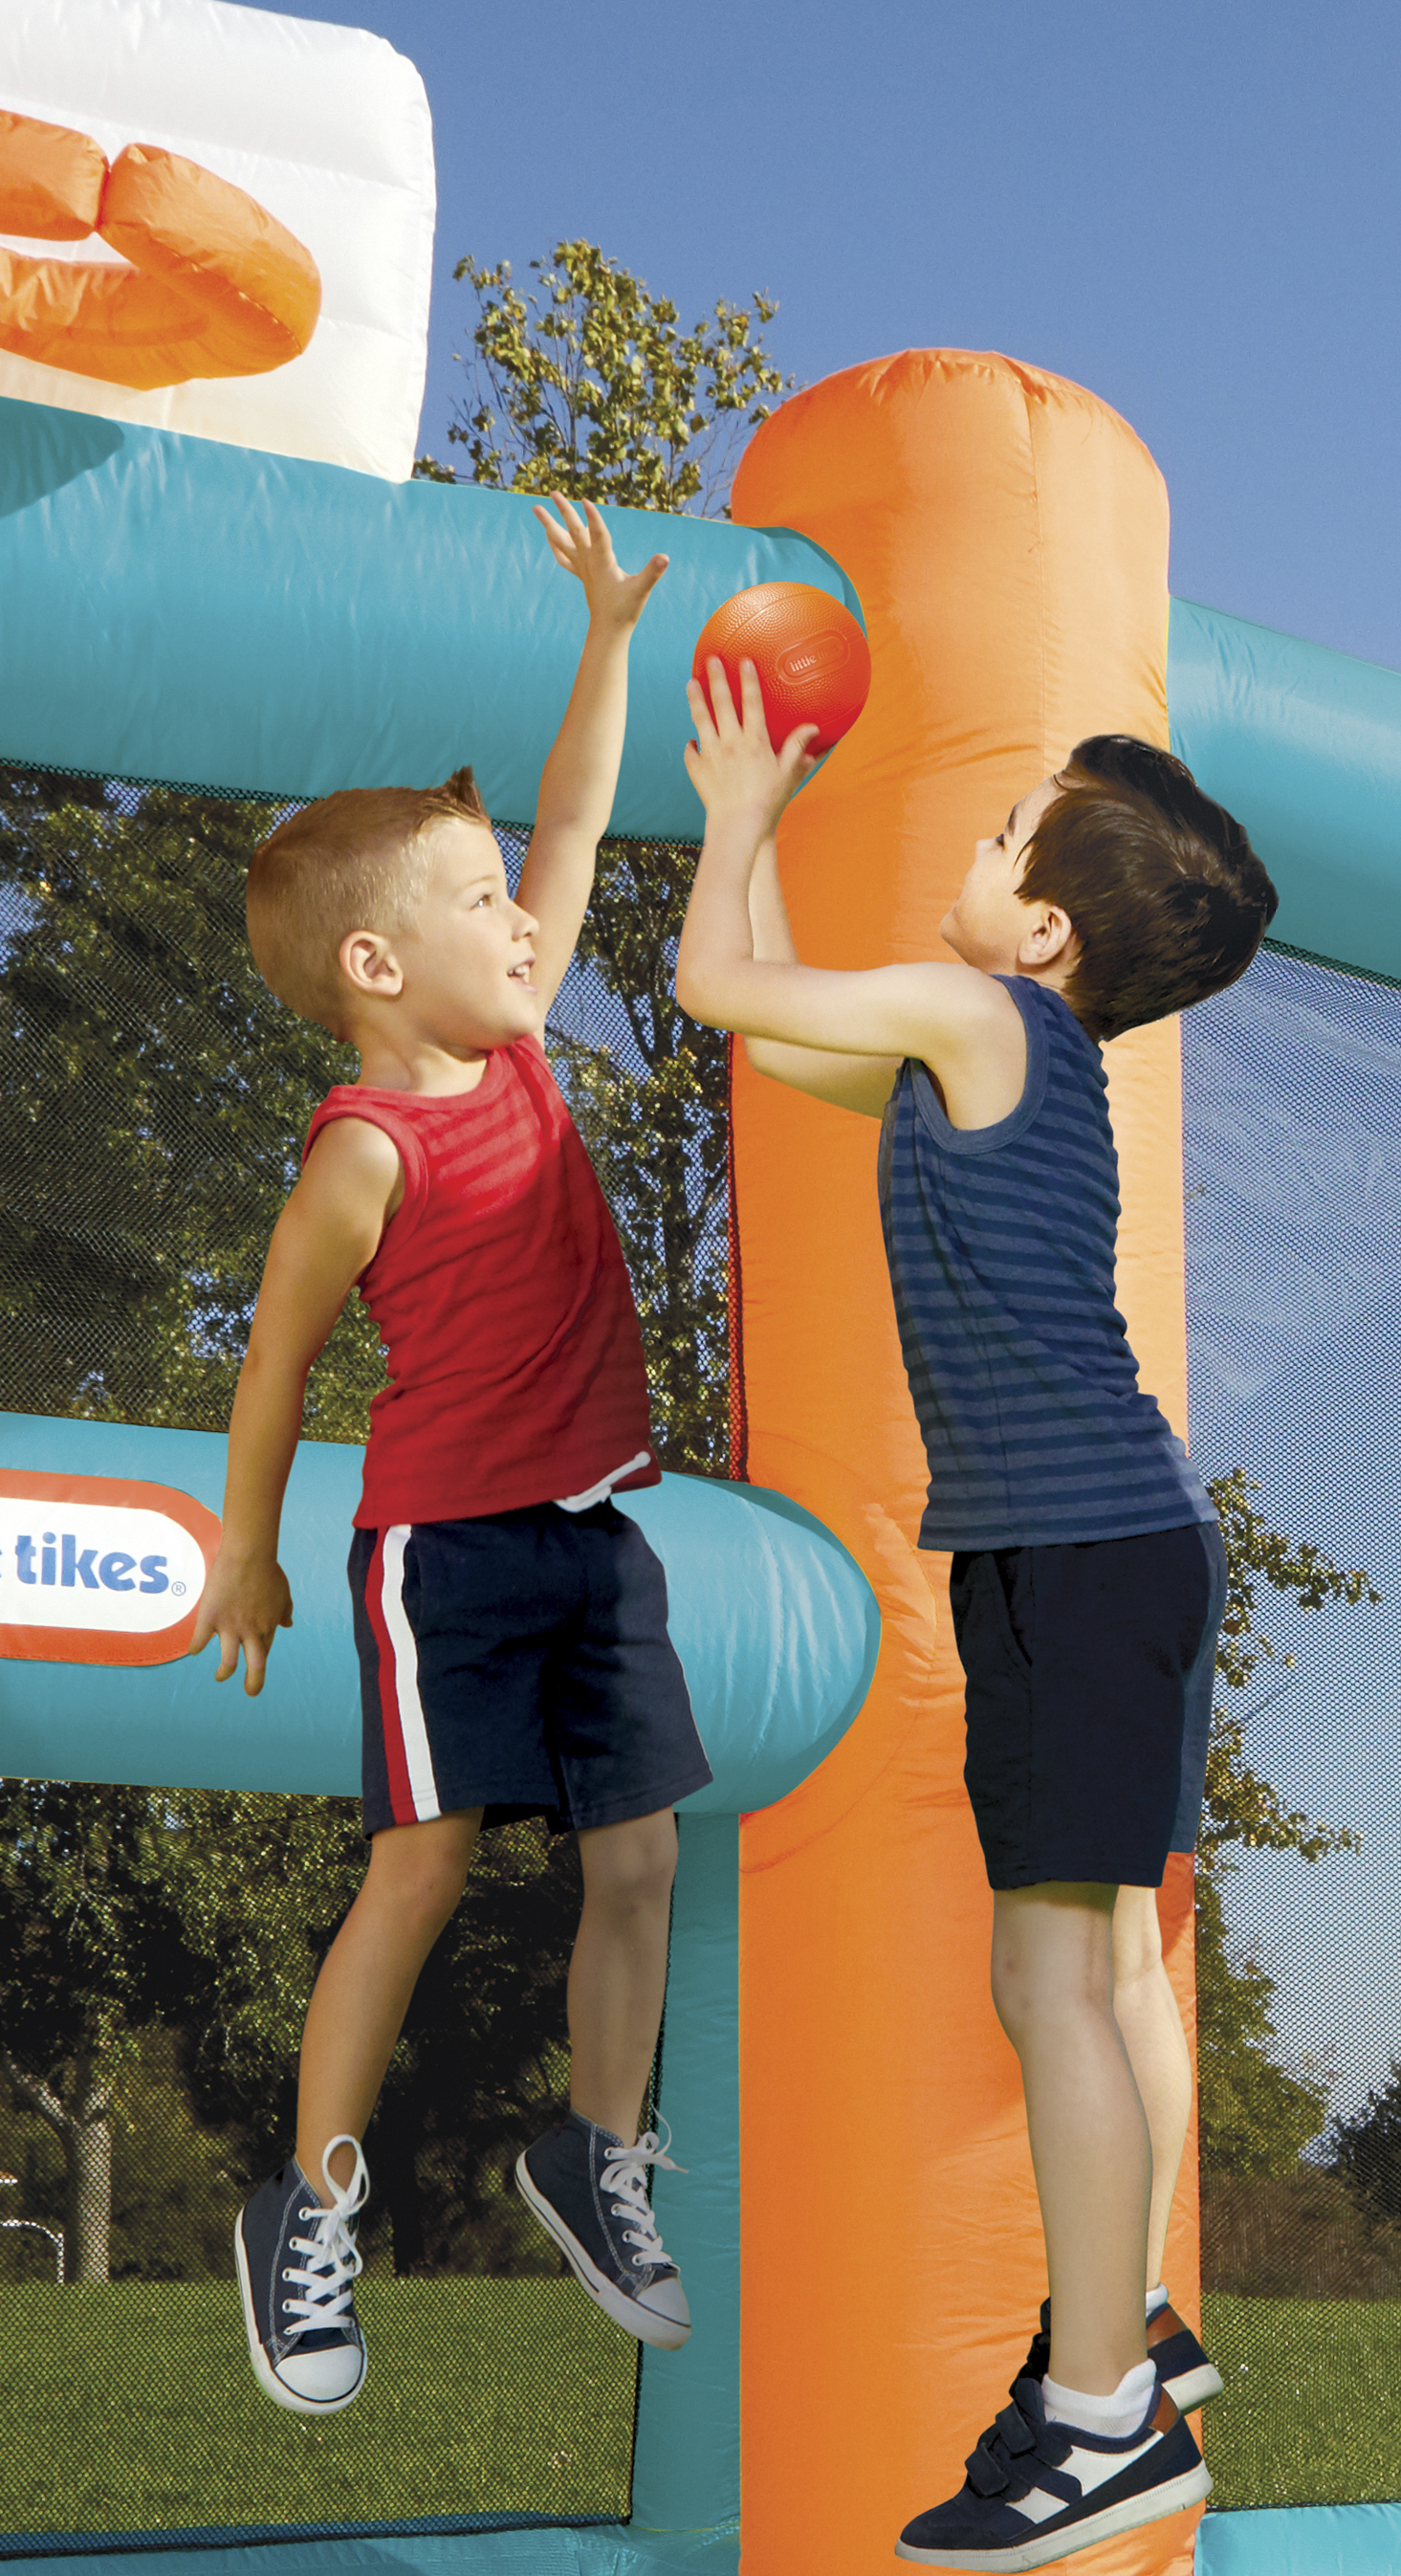 Little Tikes Huge 24' L x 12' W x 7' H Inflatable Sports Bouncer Backyard Soccer & Basketball Court and Blower, Fits up to 8 Kids, Outdoor Sports Toy Kids Boys Girls Ages 3-8 - image 4 of 5